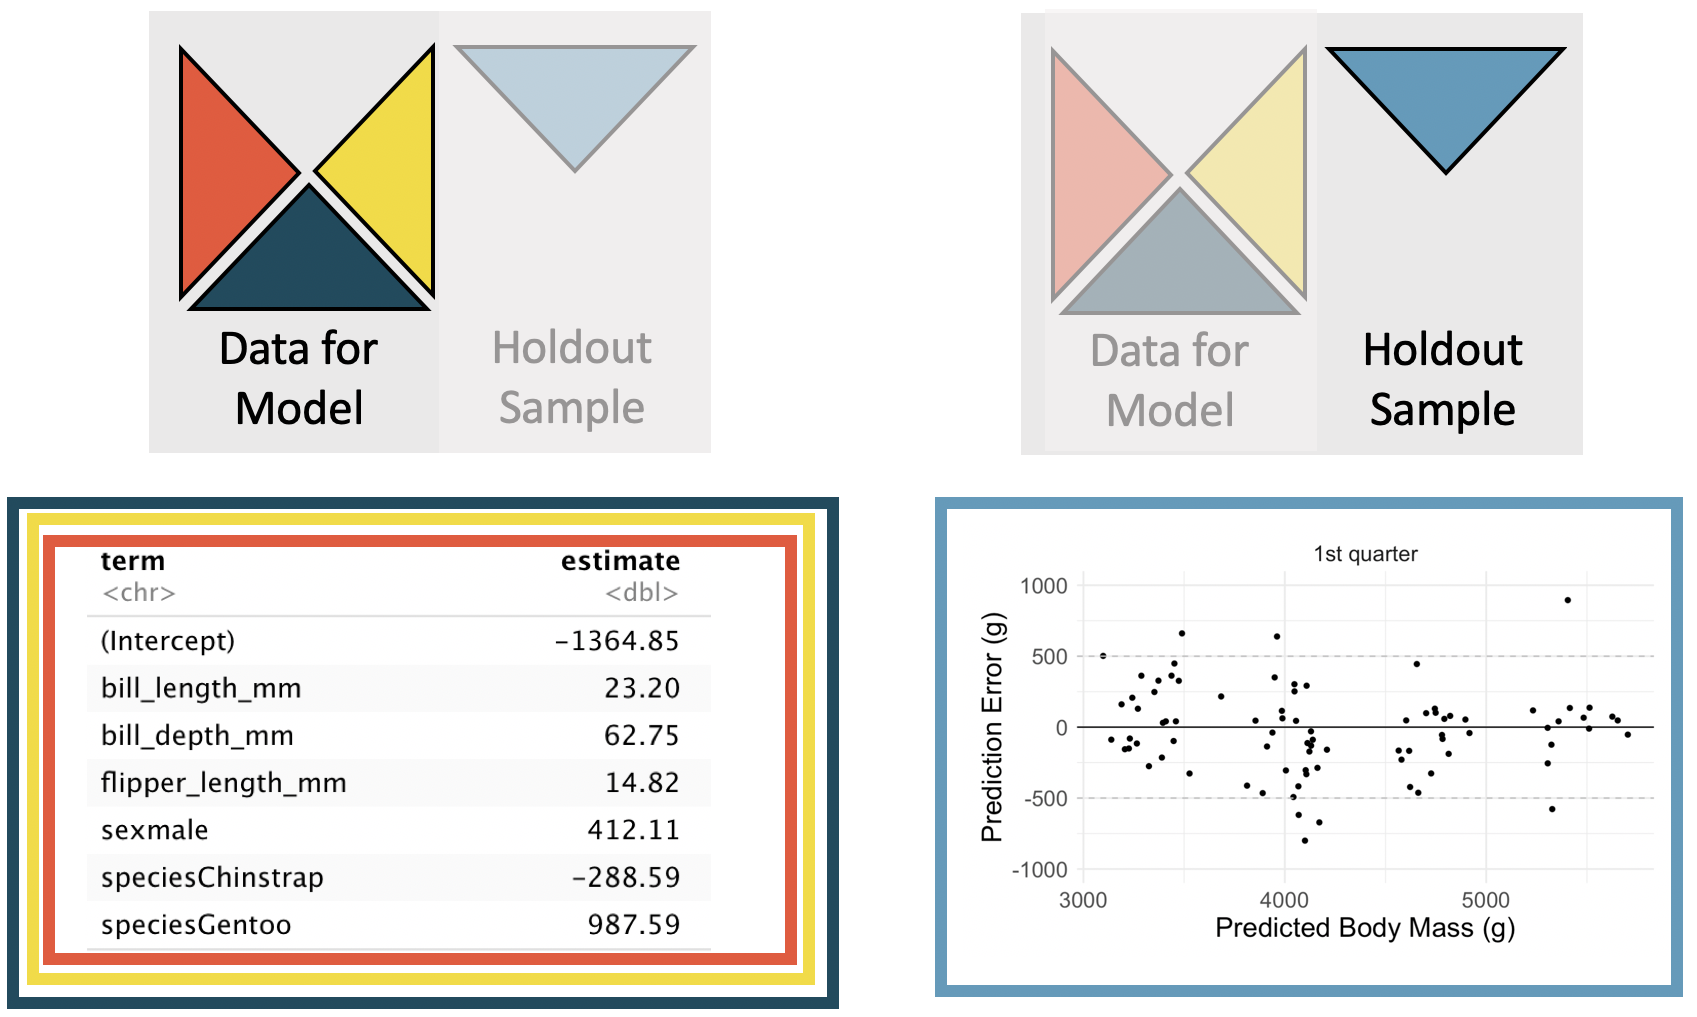 The left panel shows the linear model predicting body mass in grams using bill length, bill depth, flipper length, sex, and species; the model was built using the red, green, and yellow triangular sections of the observed data.  The right panel shows a scatterplot of the prediction error versus the fitted values for the set of observations in the blue triangular section of the observed data. The prediction errors range from roughly -500 grams to +500 grams.